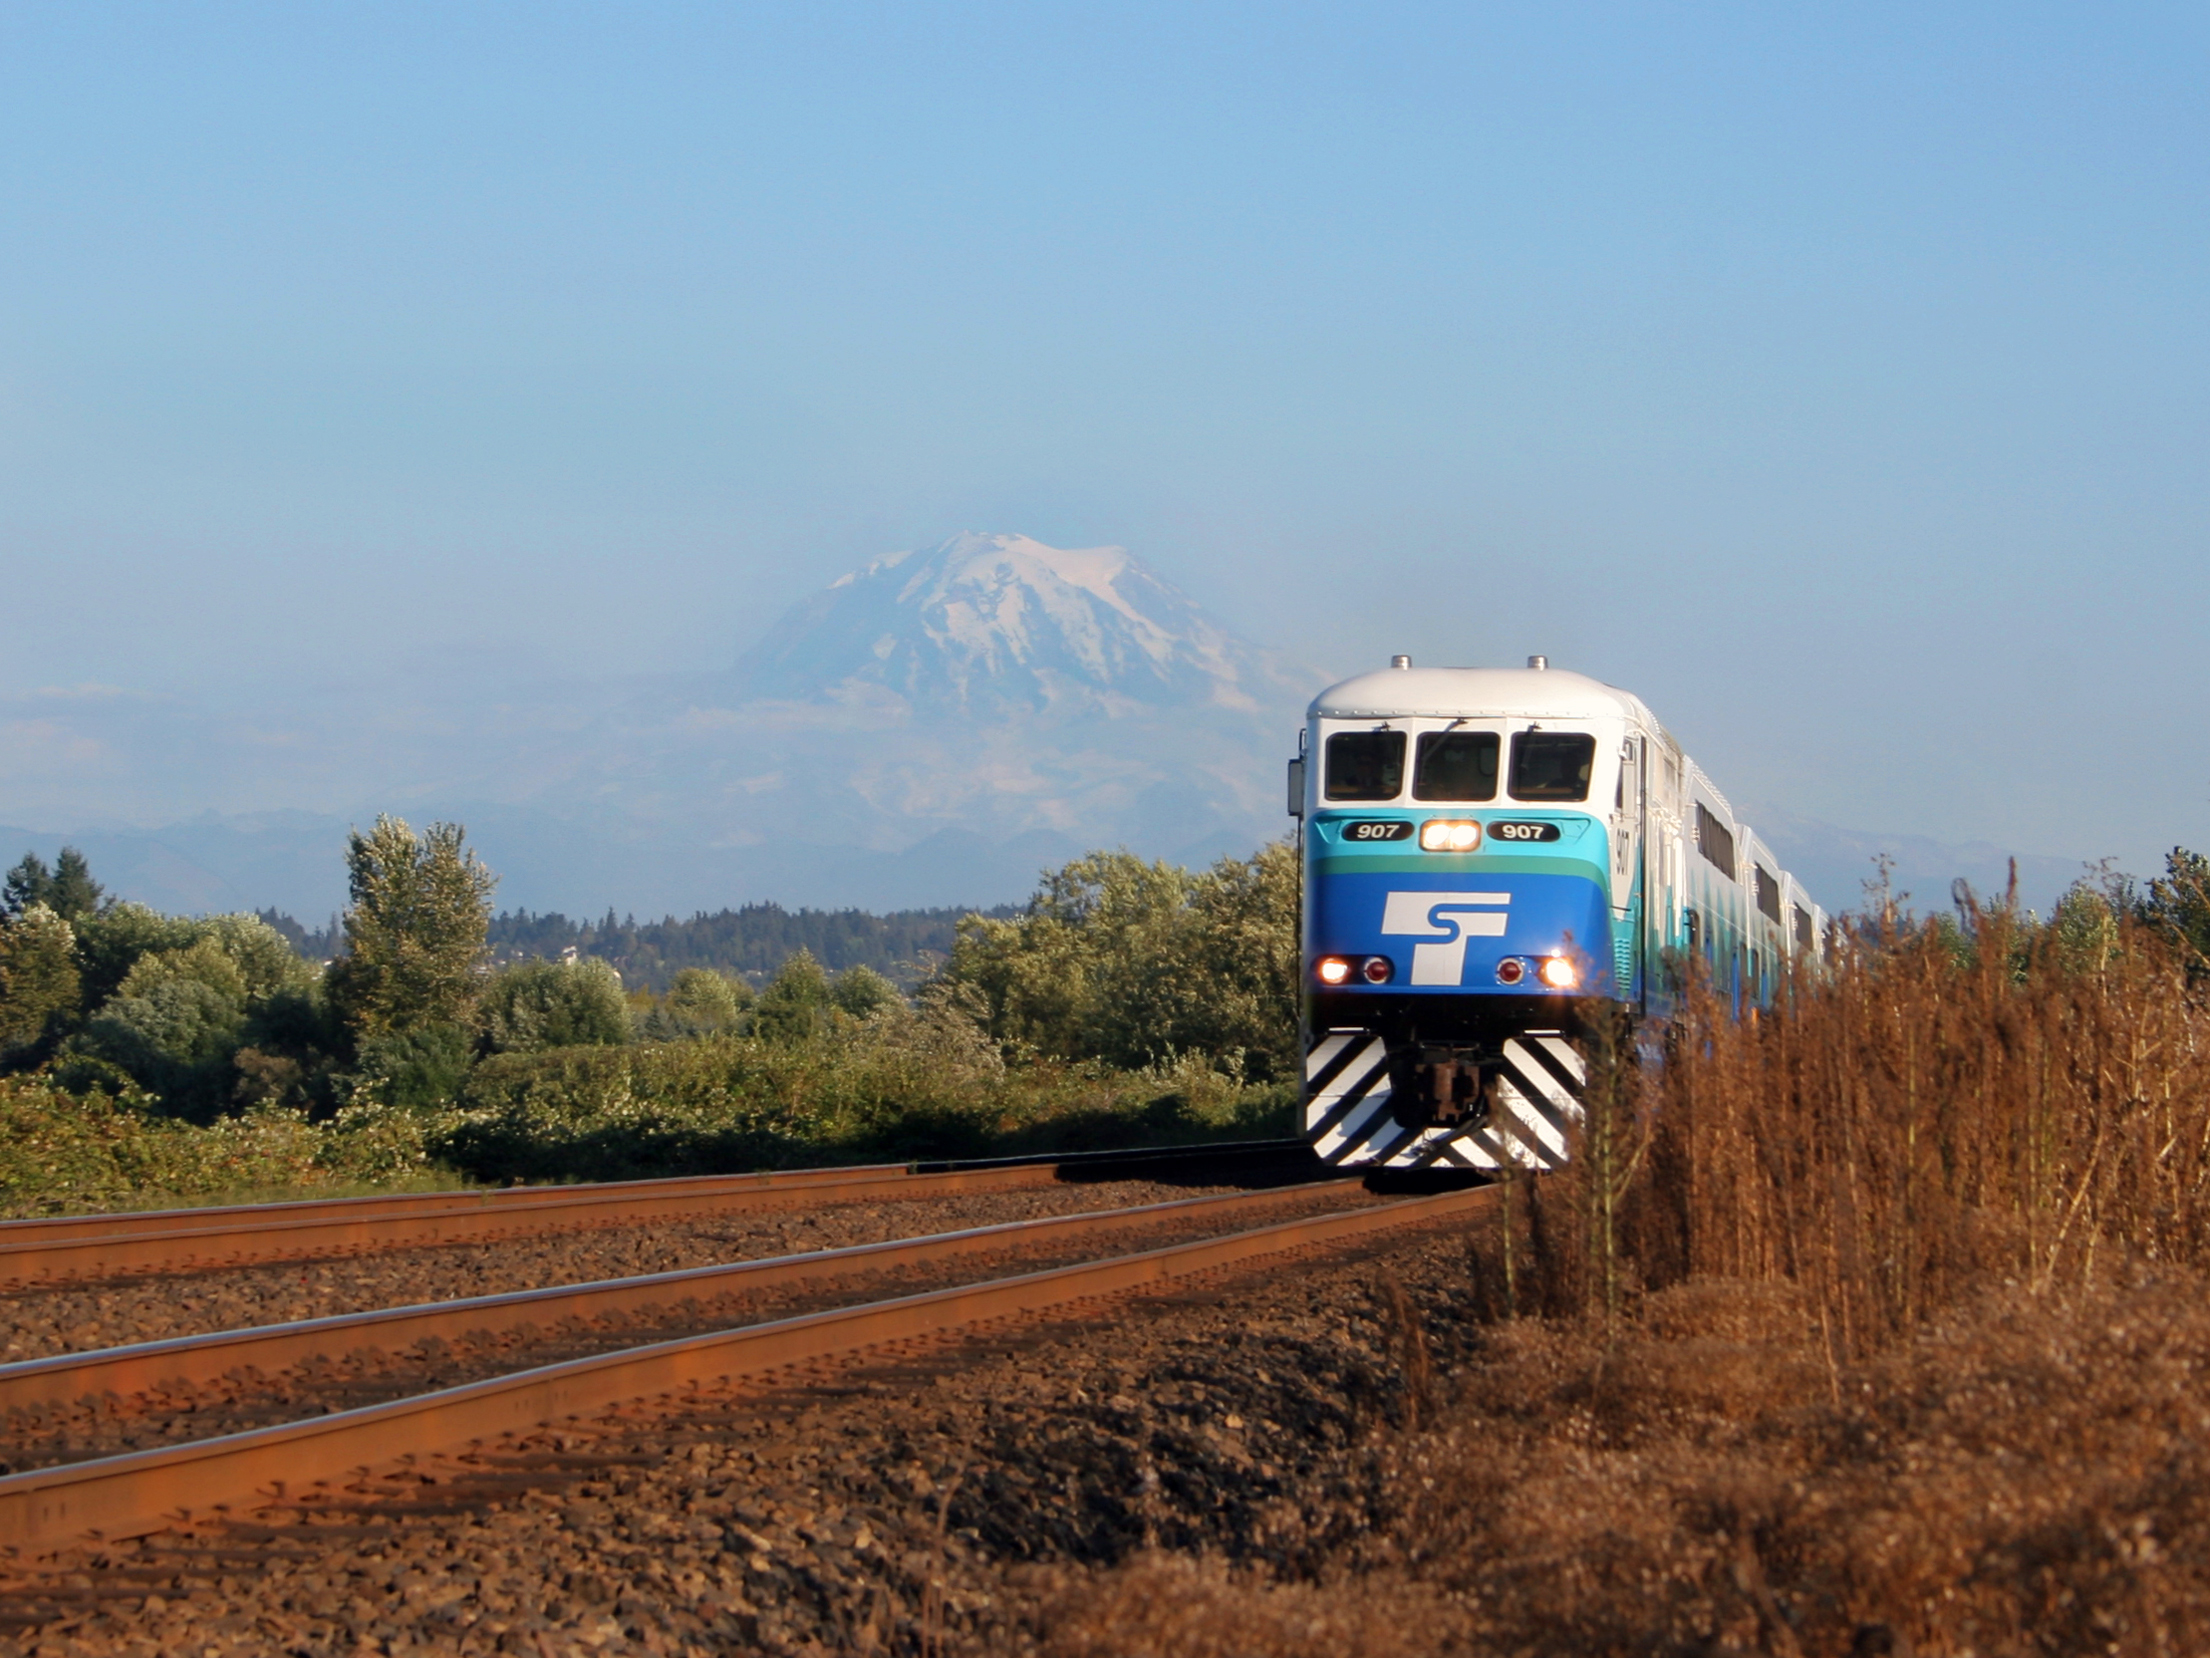 On a sunny day, a blue-and-white train runs on tracks amid low foliage with a view of a mountain in the background.